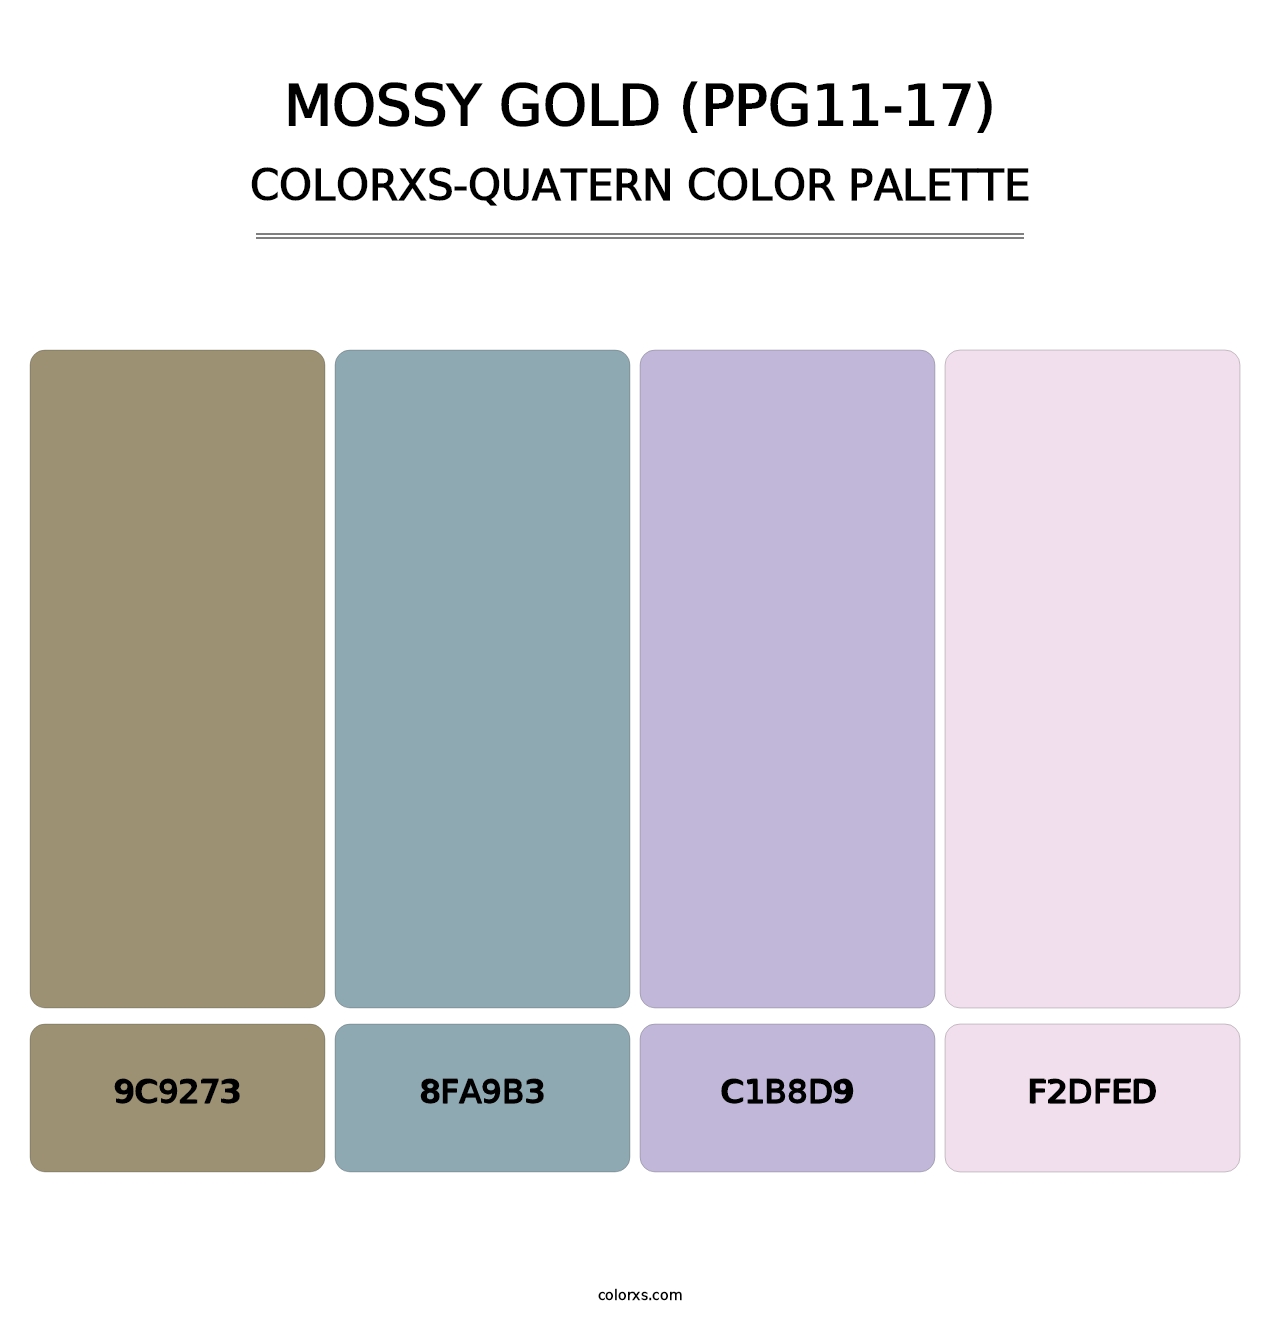 Mossy Gold (PPG11-17) - Colorxs Quatern Palette